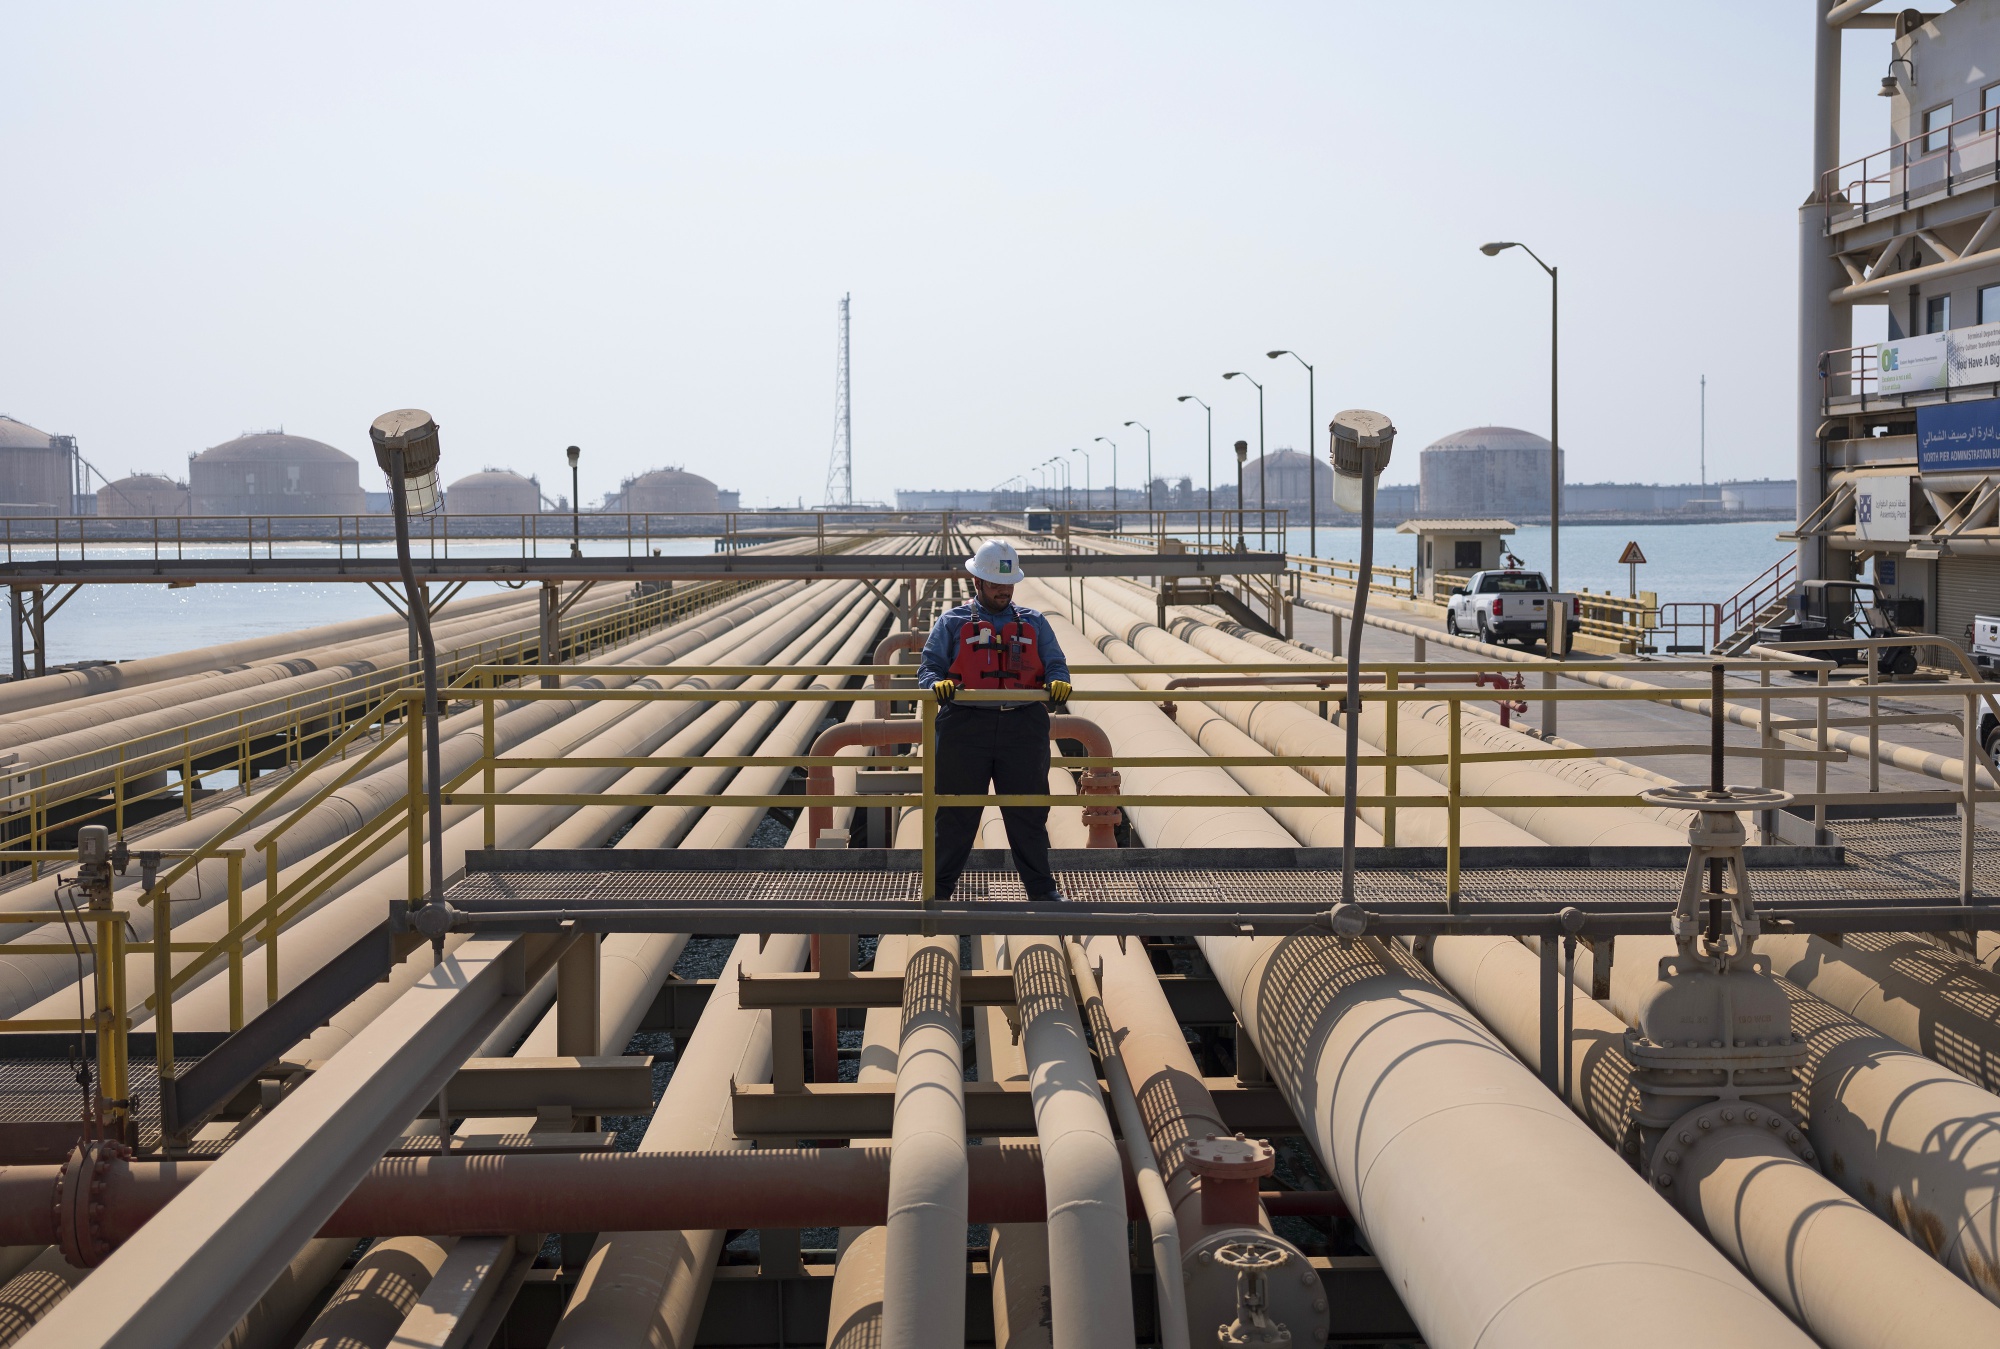 An employee looks out across oil pipes at the North Pier Terminal, operated by Saudi Aramco, in Ras Tanura, Saudi Arabia.